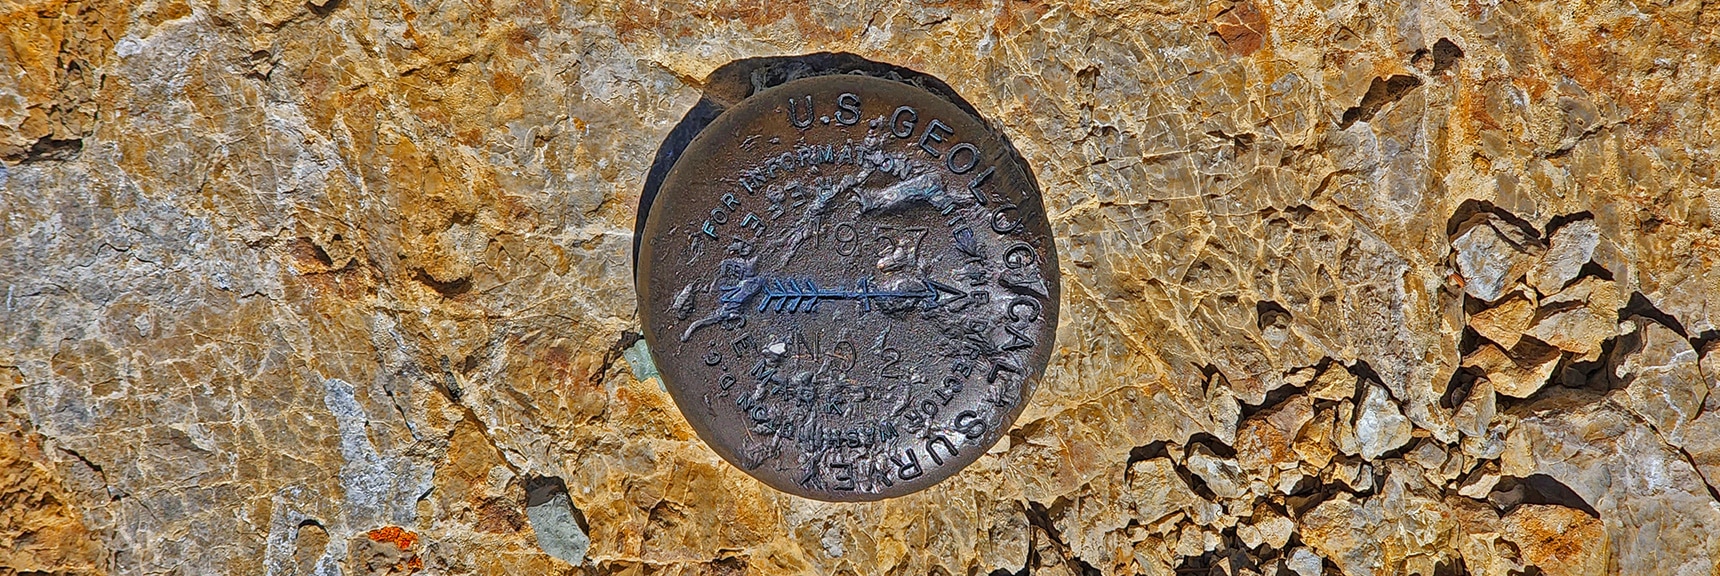 Mummy Mountain Official Geological Survey Summit Marker, 1957 | Mummy Mountain Grand Crossing | Lee Canyon to Deer Creek Road | Mt Charleston Wilderness | Spring Mountains, Nevada |